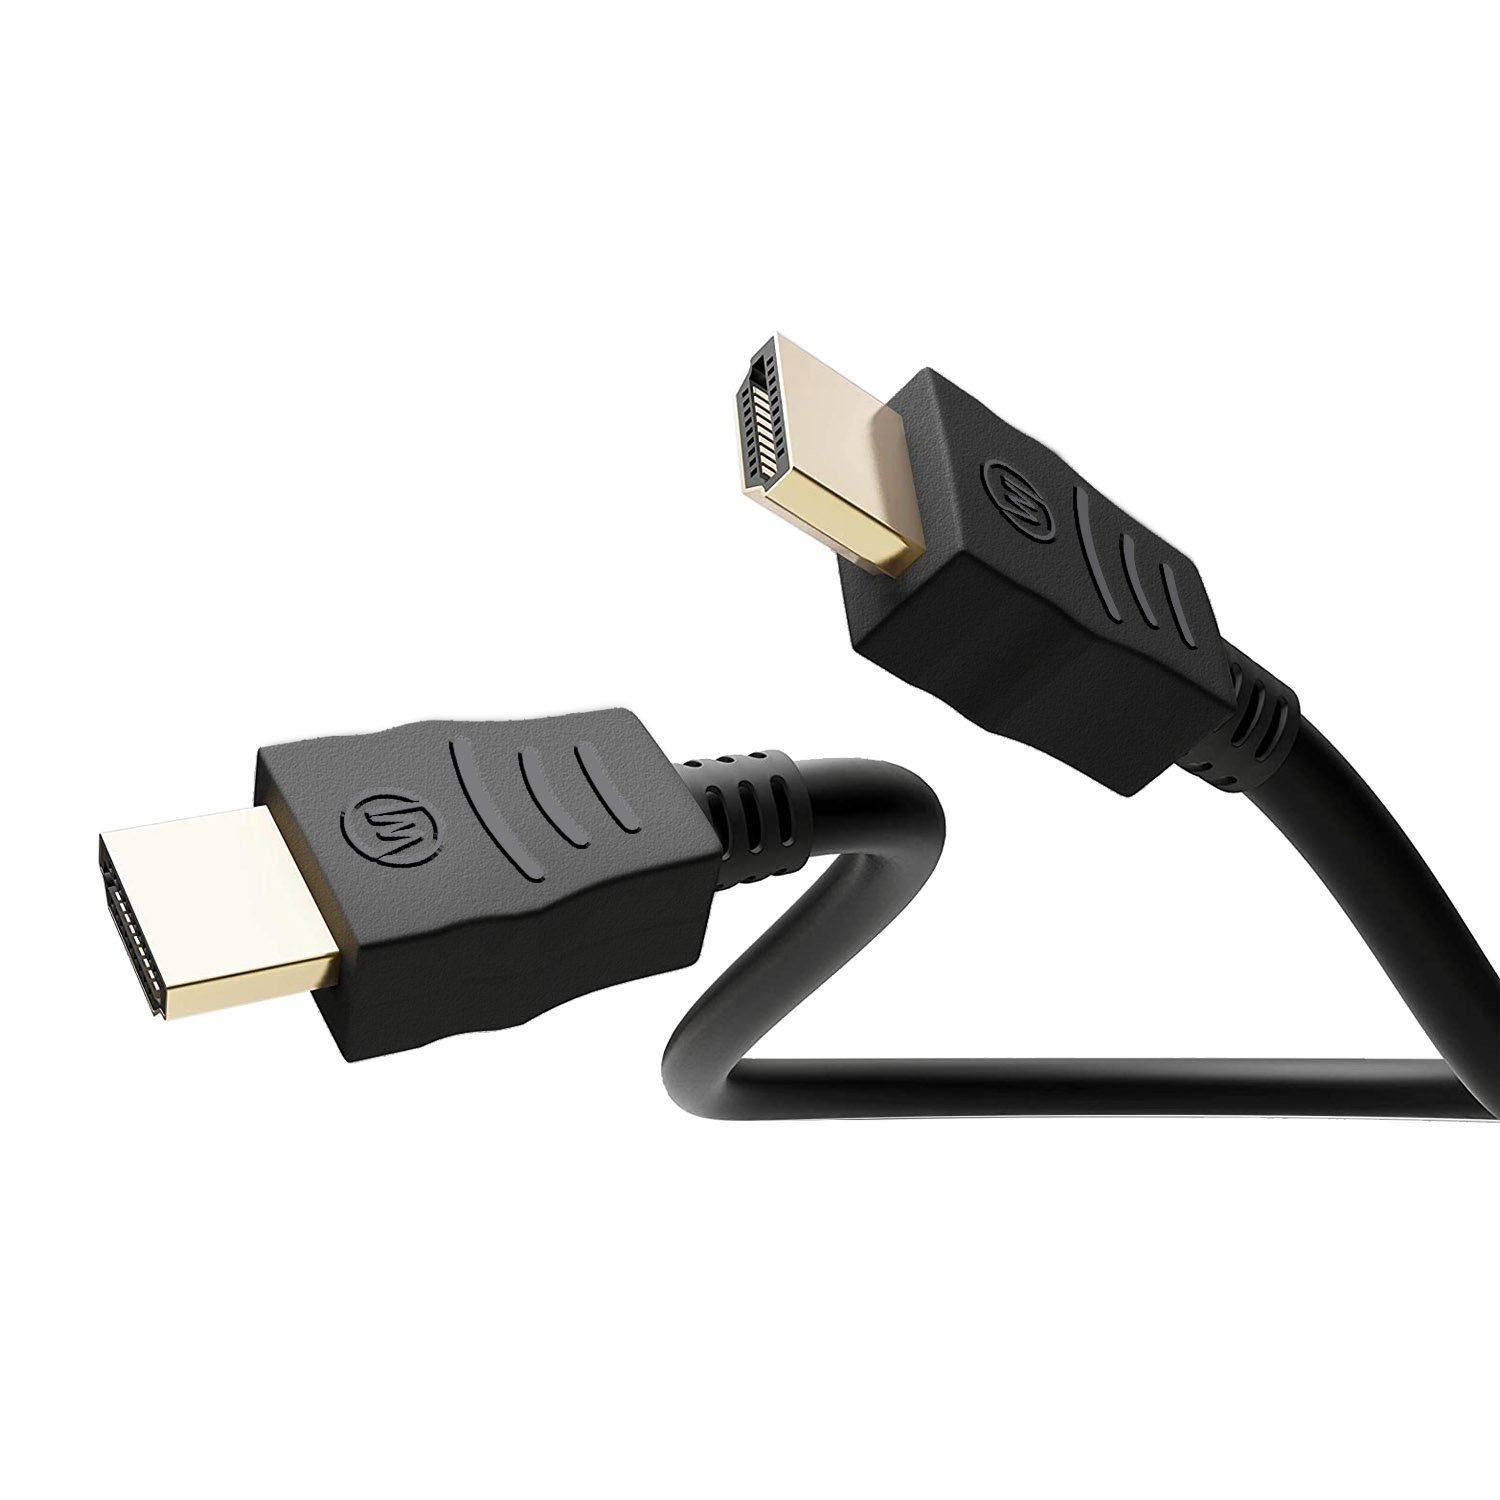 CHILI für WICKED 10, 2m UHD 5 X HDCP Playstation II, ARC, S, Xbox HDMI-Kabel / Kabel Sonos 2.2, 8K eARC, HDR PS5, HDMI 2.1,